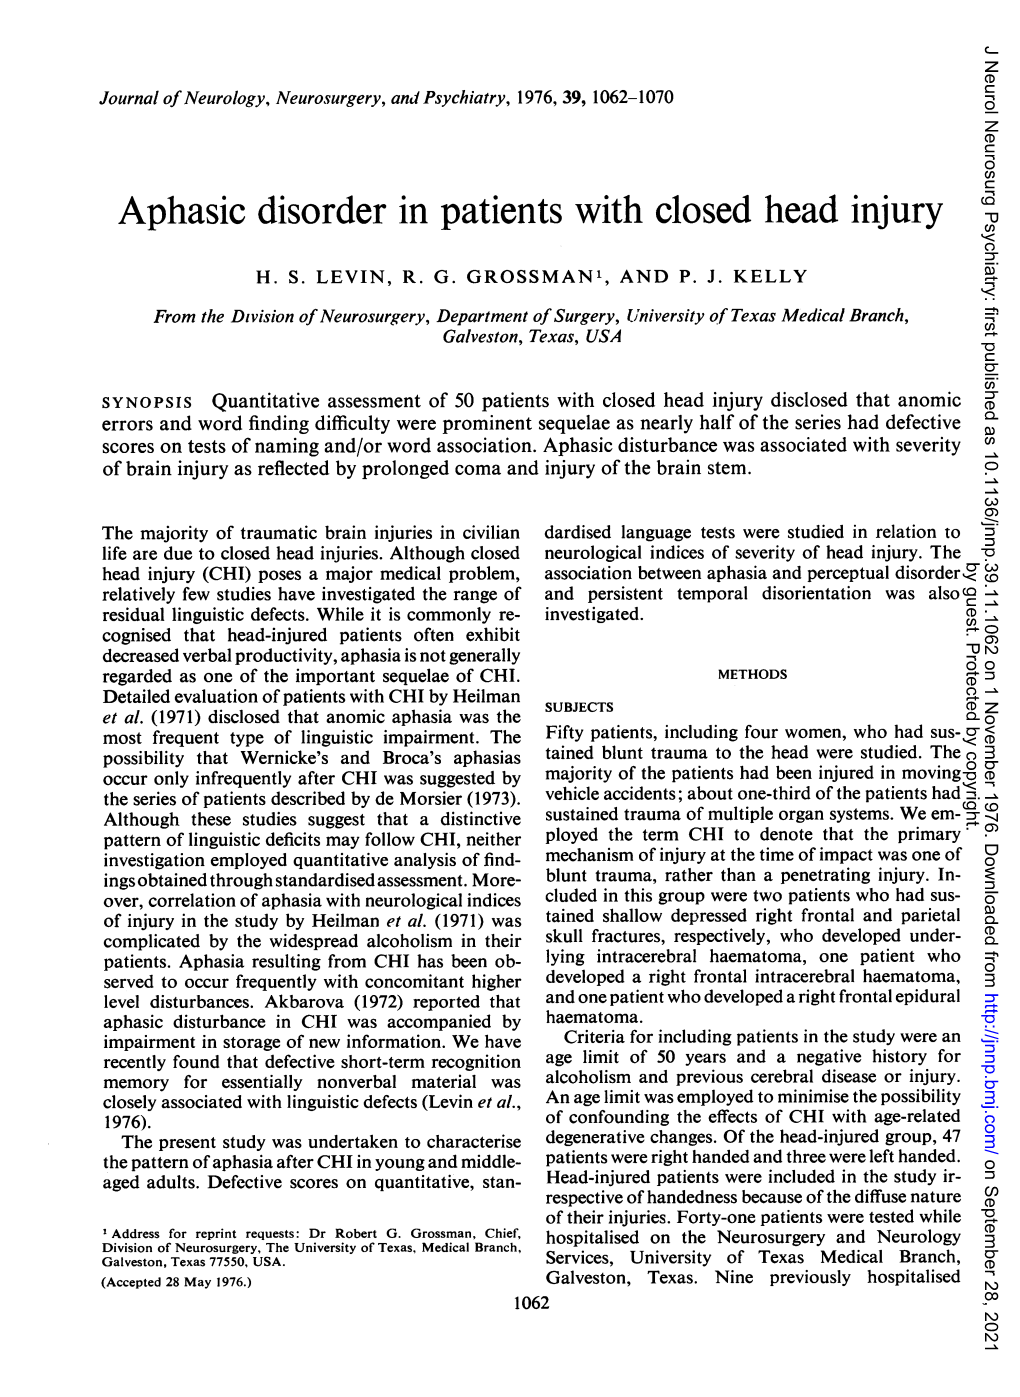 Aphasic Disorder in Patients with Closed Head Injury